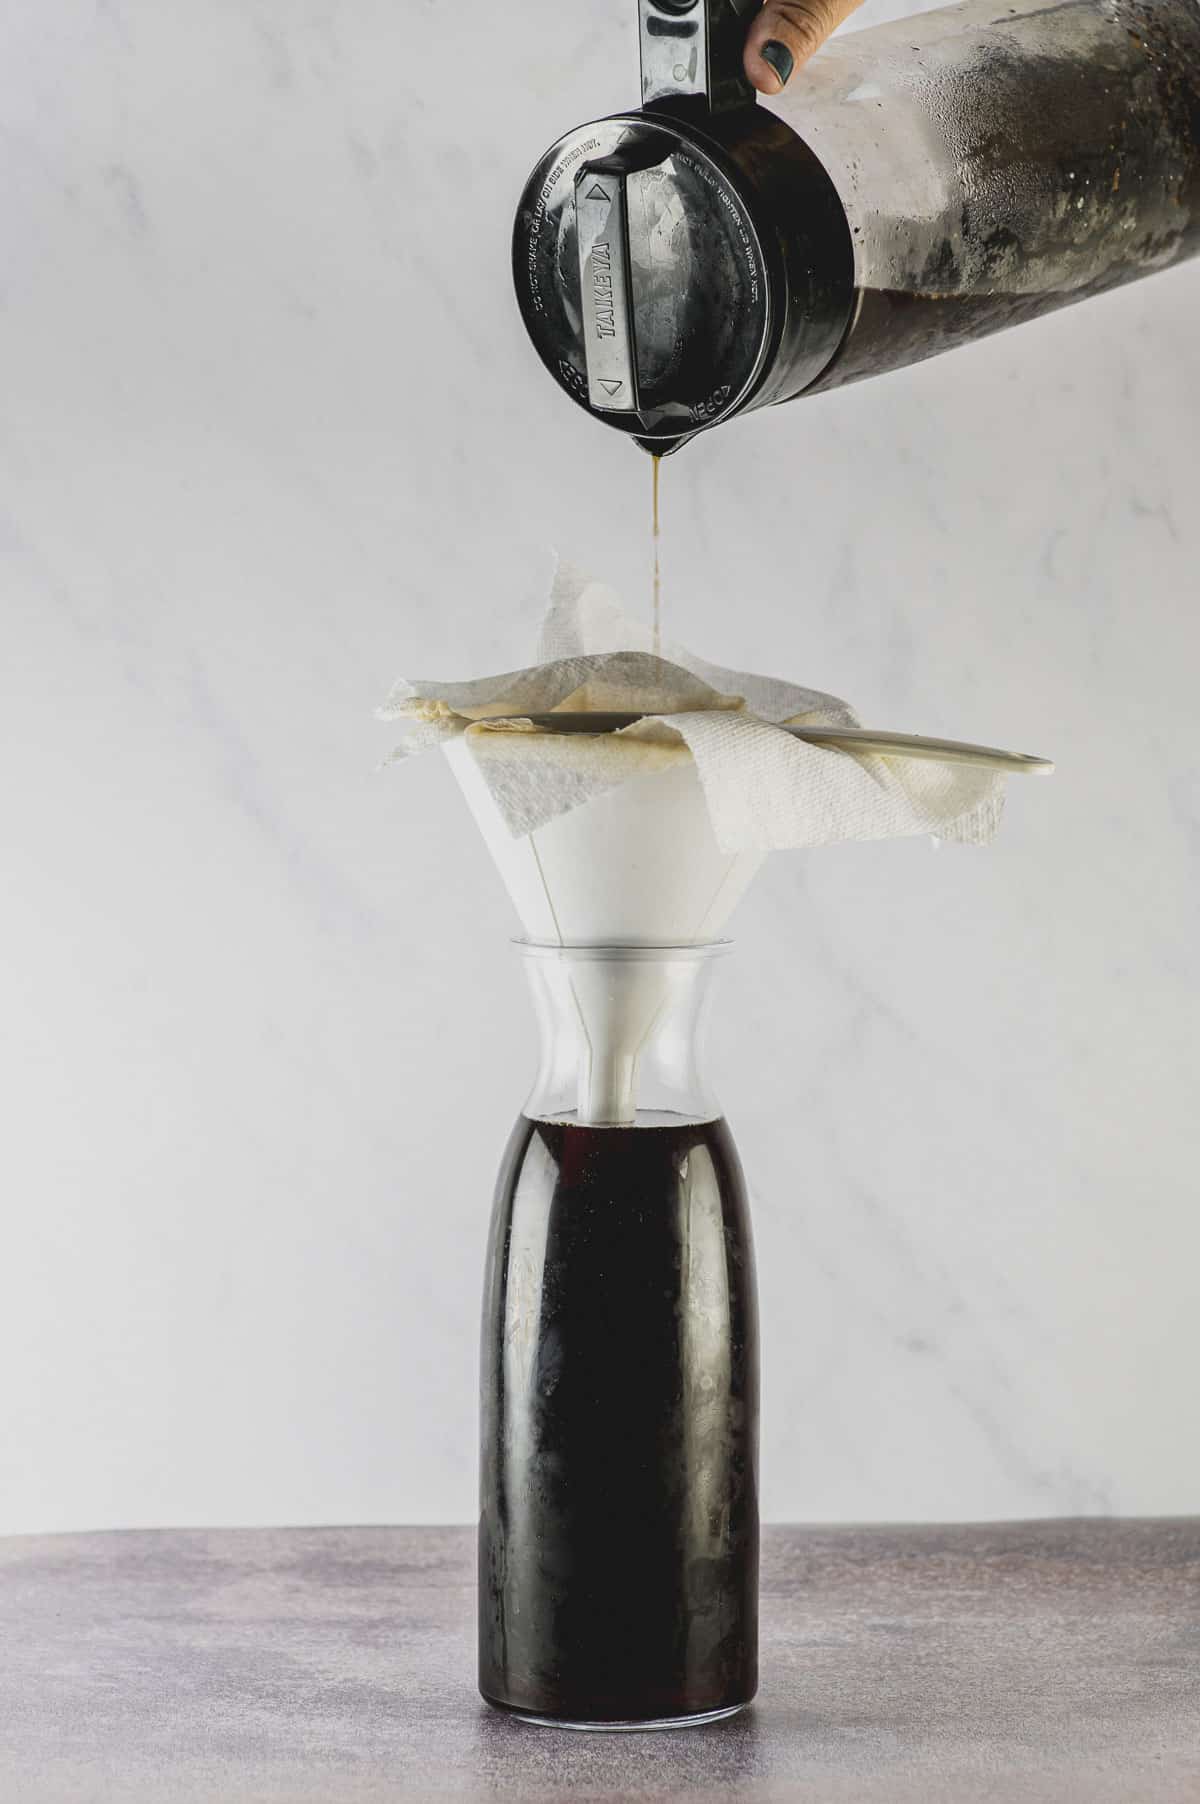 filter cold brew coffee through a paper towel lined funnel